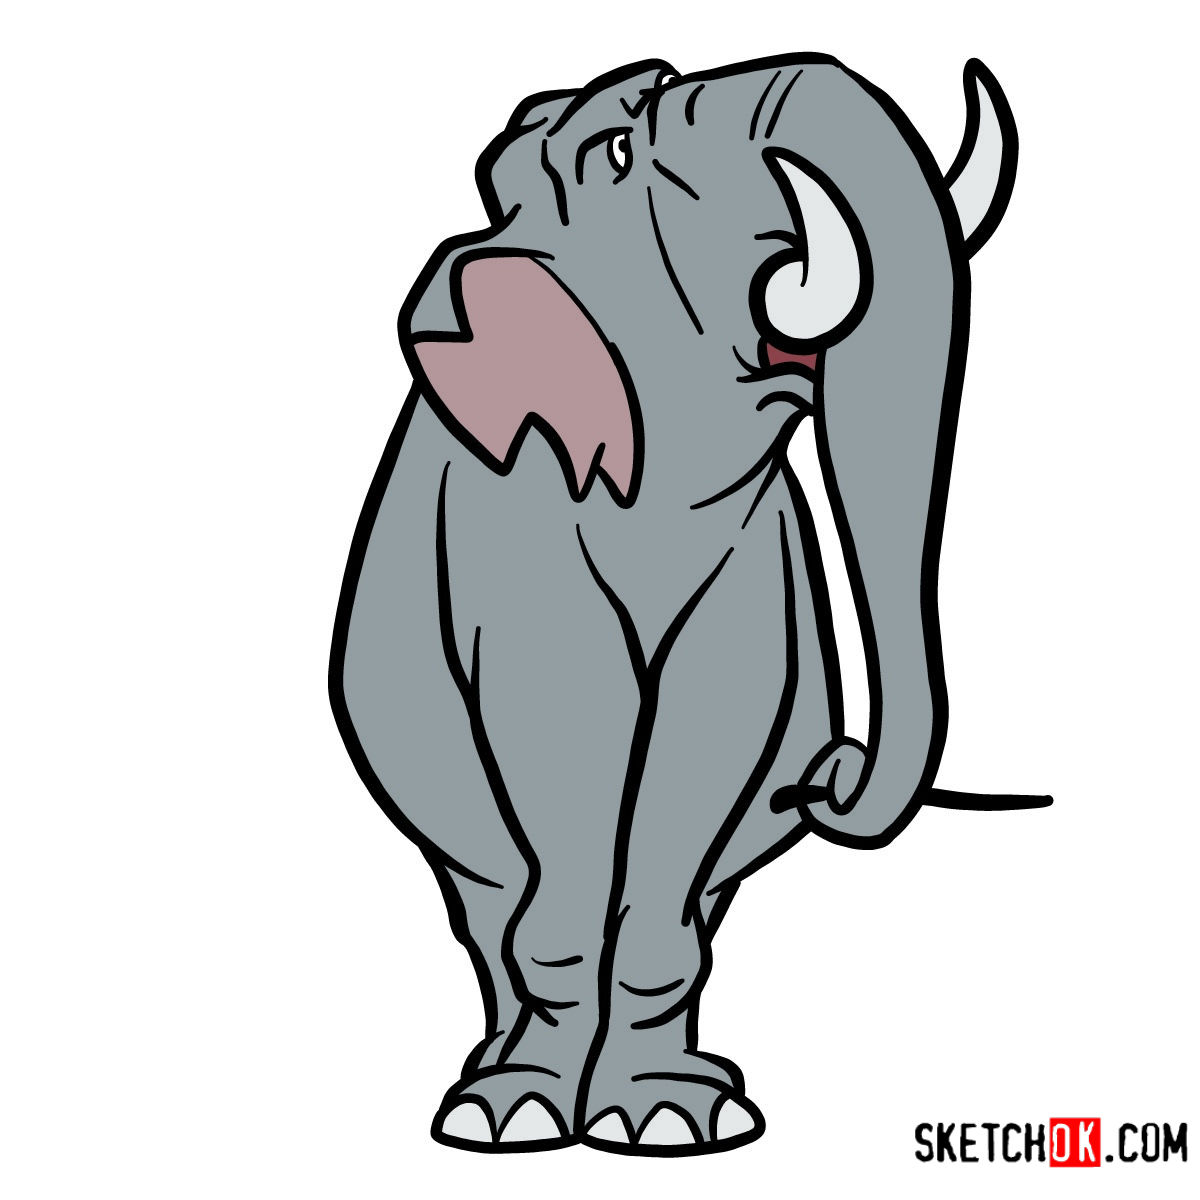 How to draw Colonel Hathi from the Jungle Book